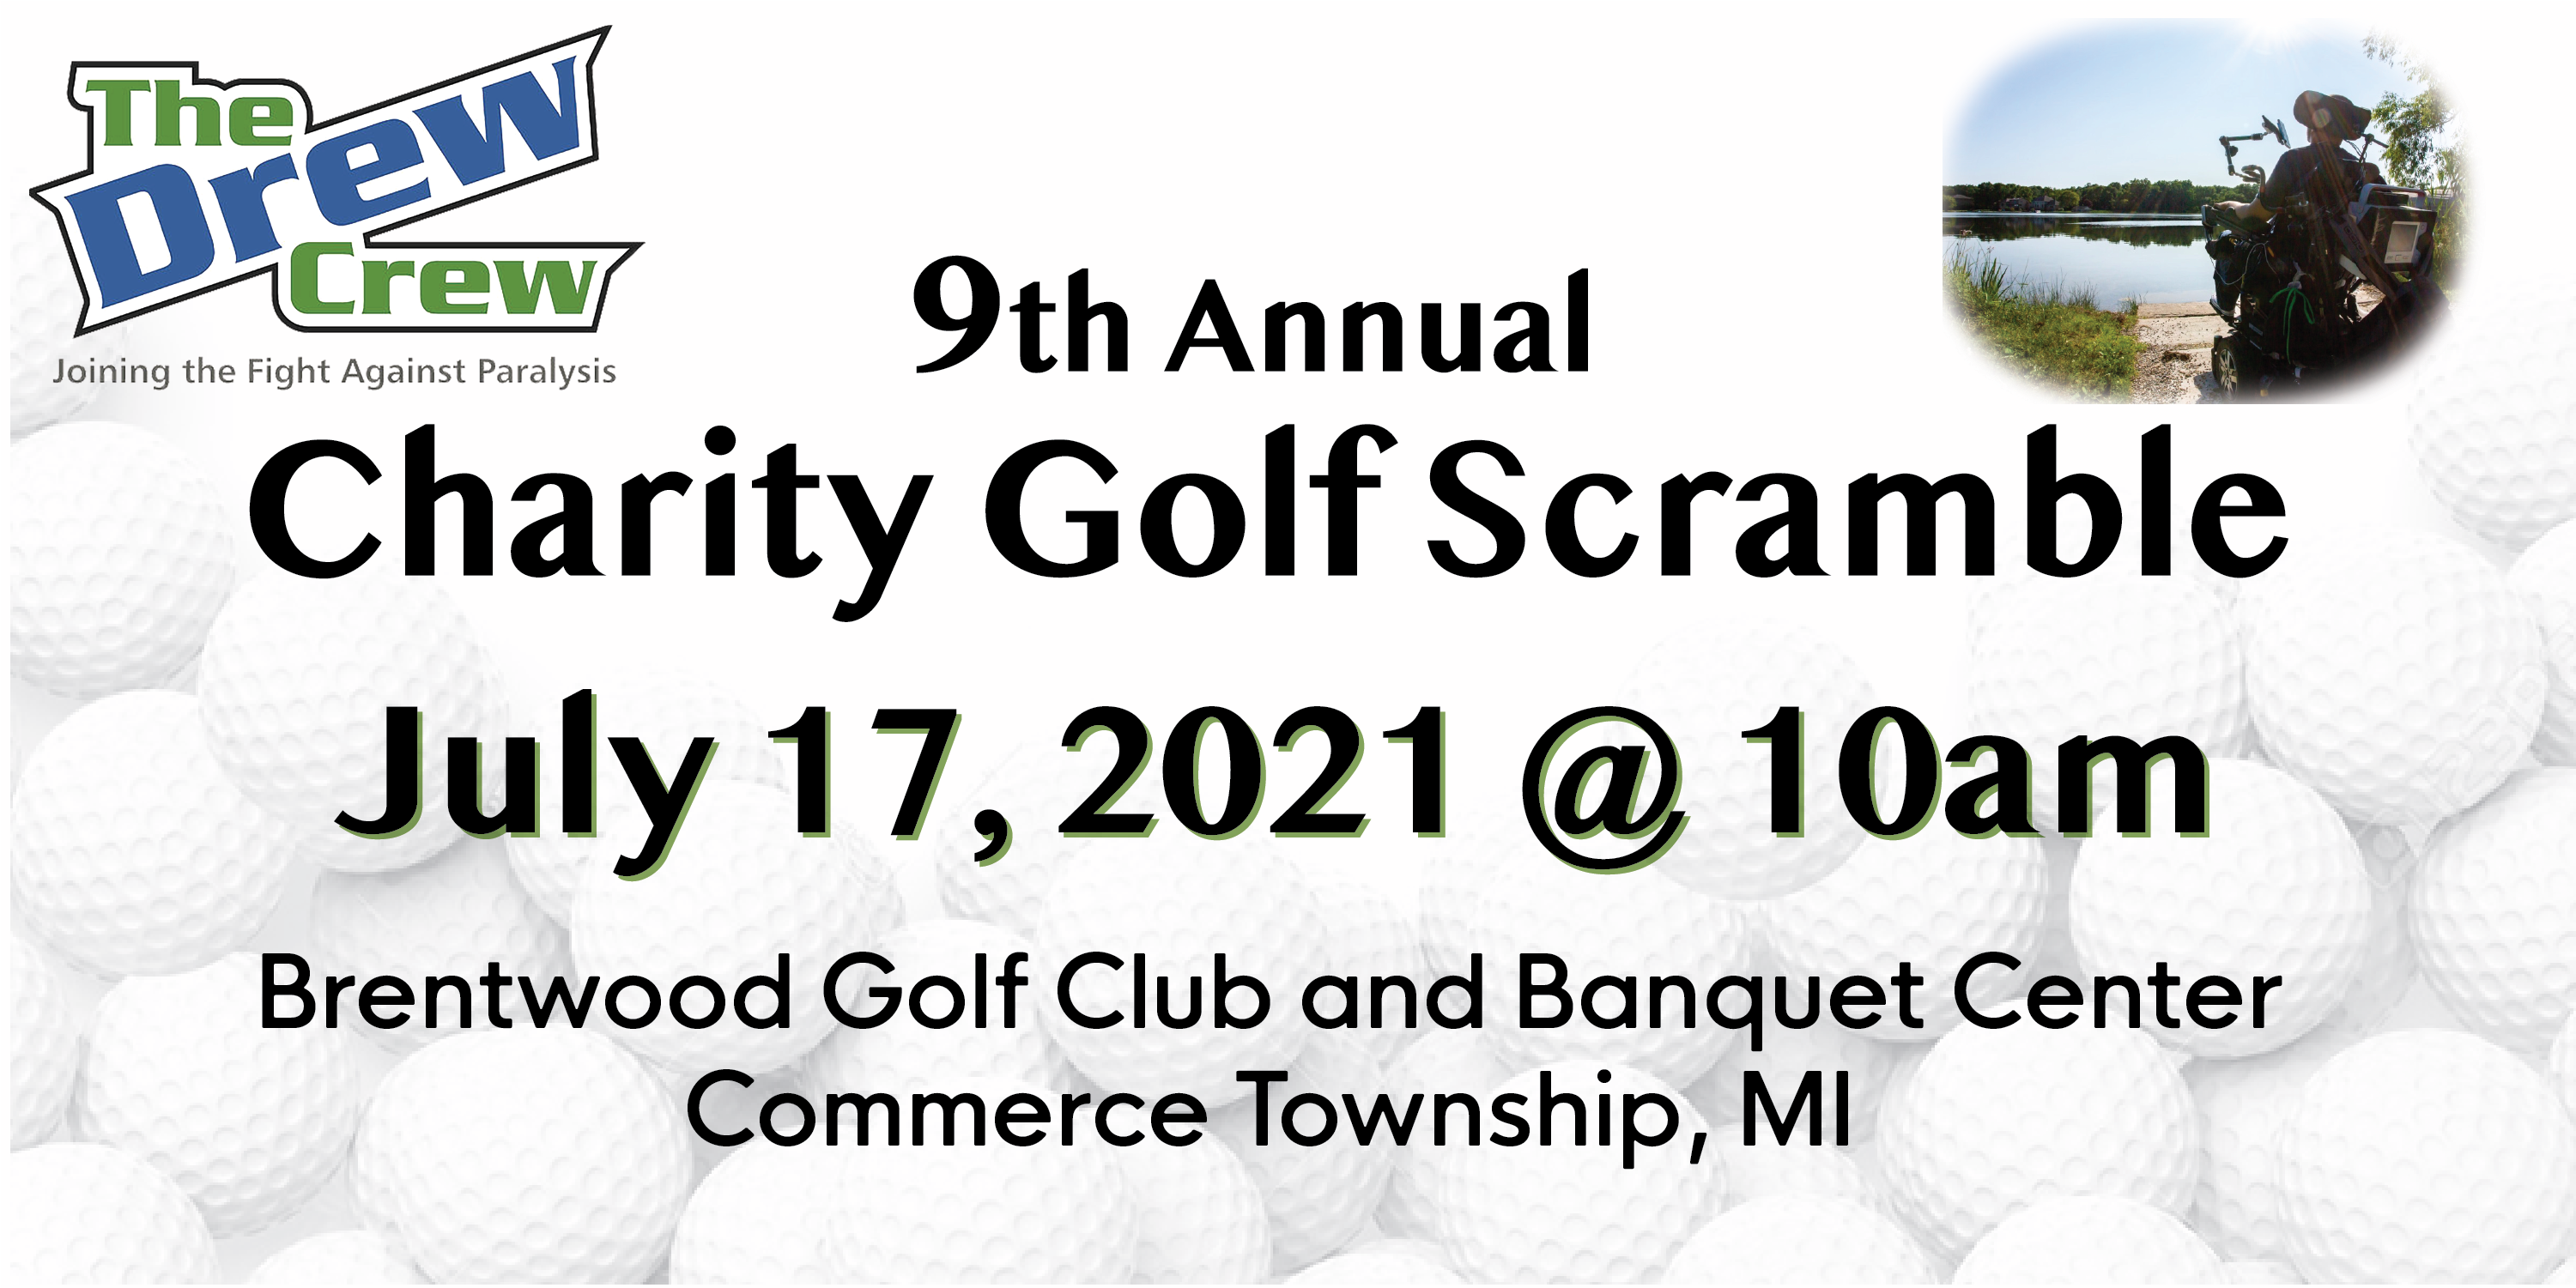 9th Annual Charity Golf Scramble presented by The Drew Crew